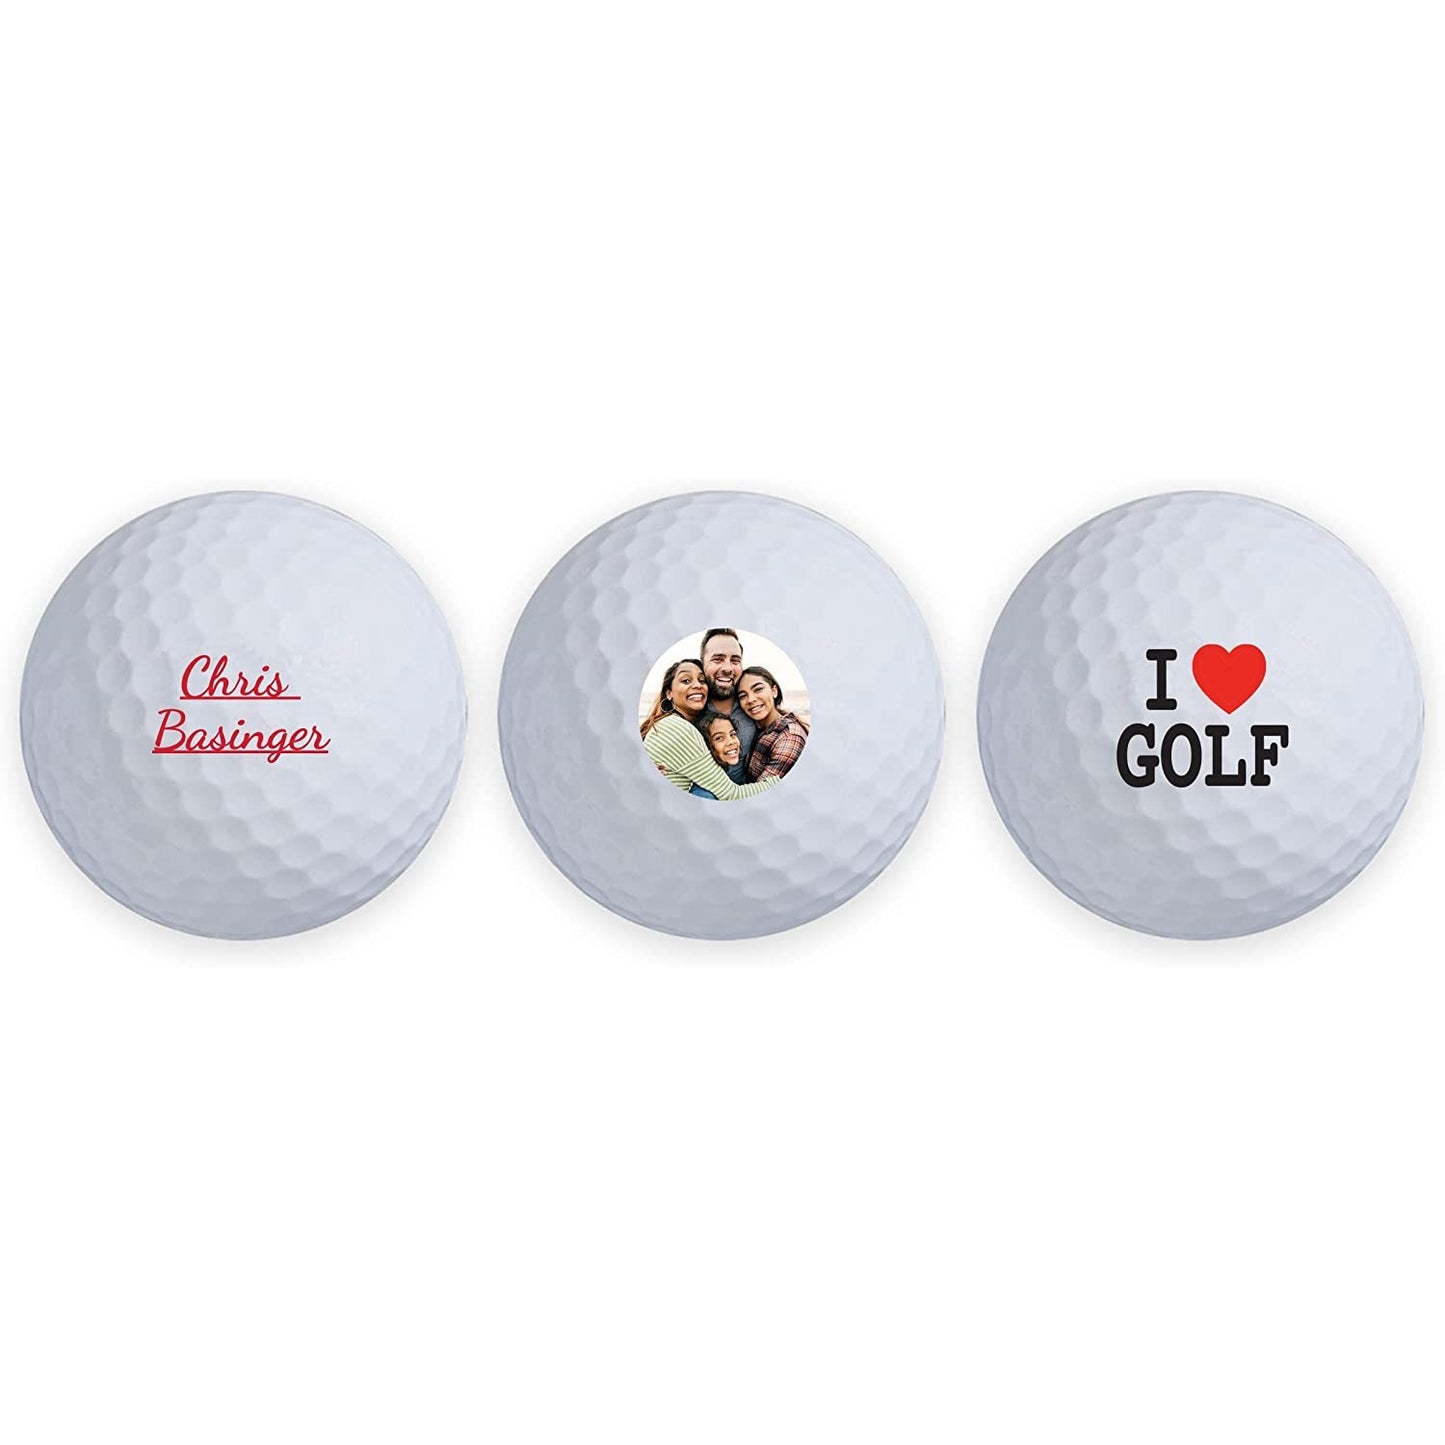 Three personalized golf balls. One has a name printed on it, the other has a family portrait and the other balls says, 'I heart golf.'